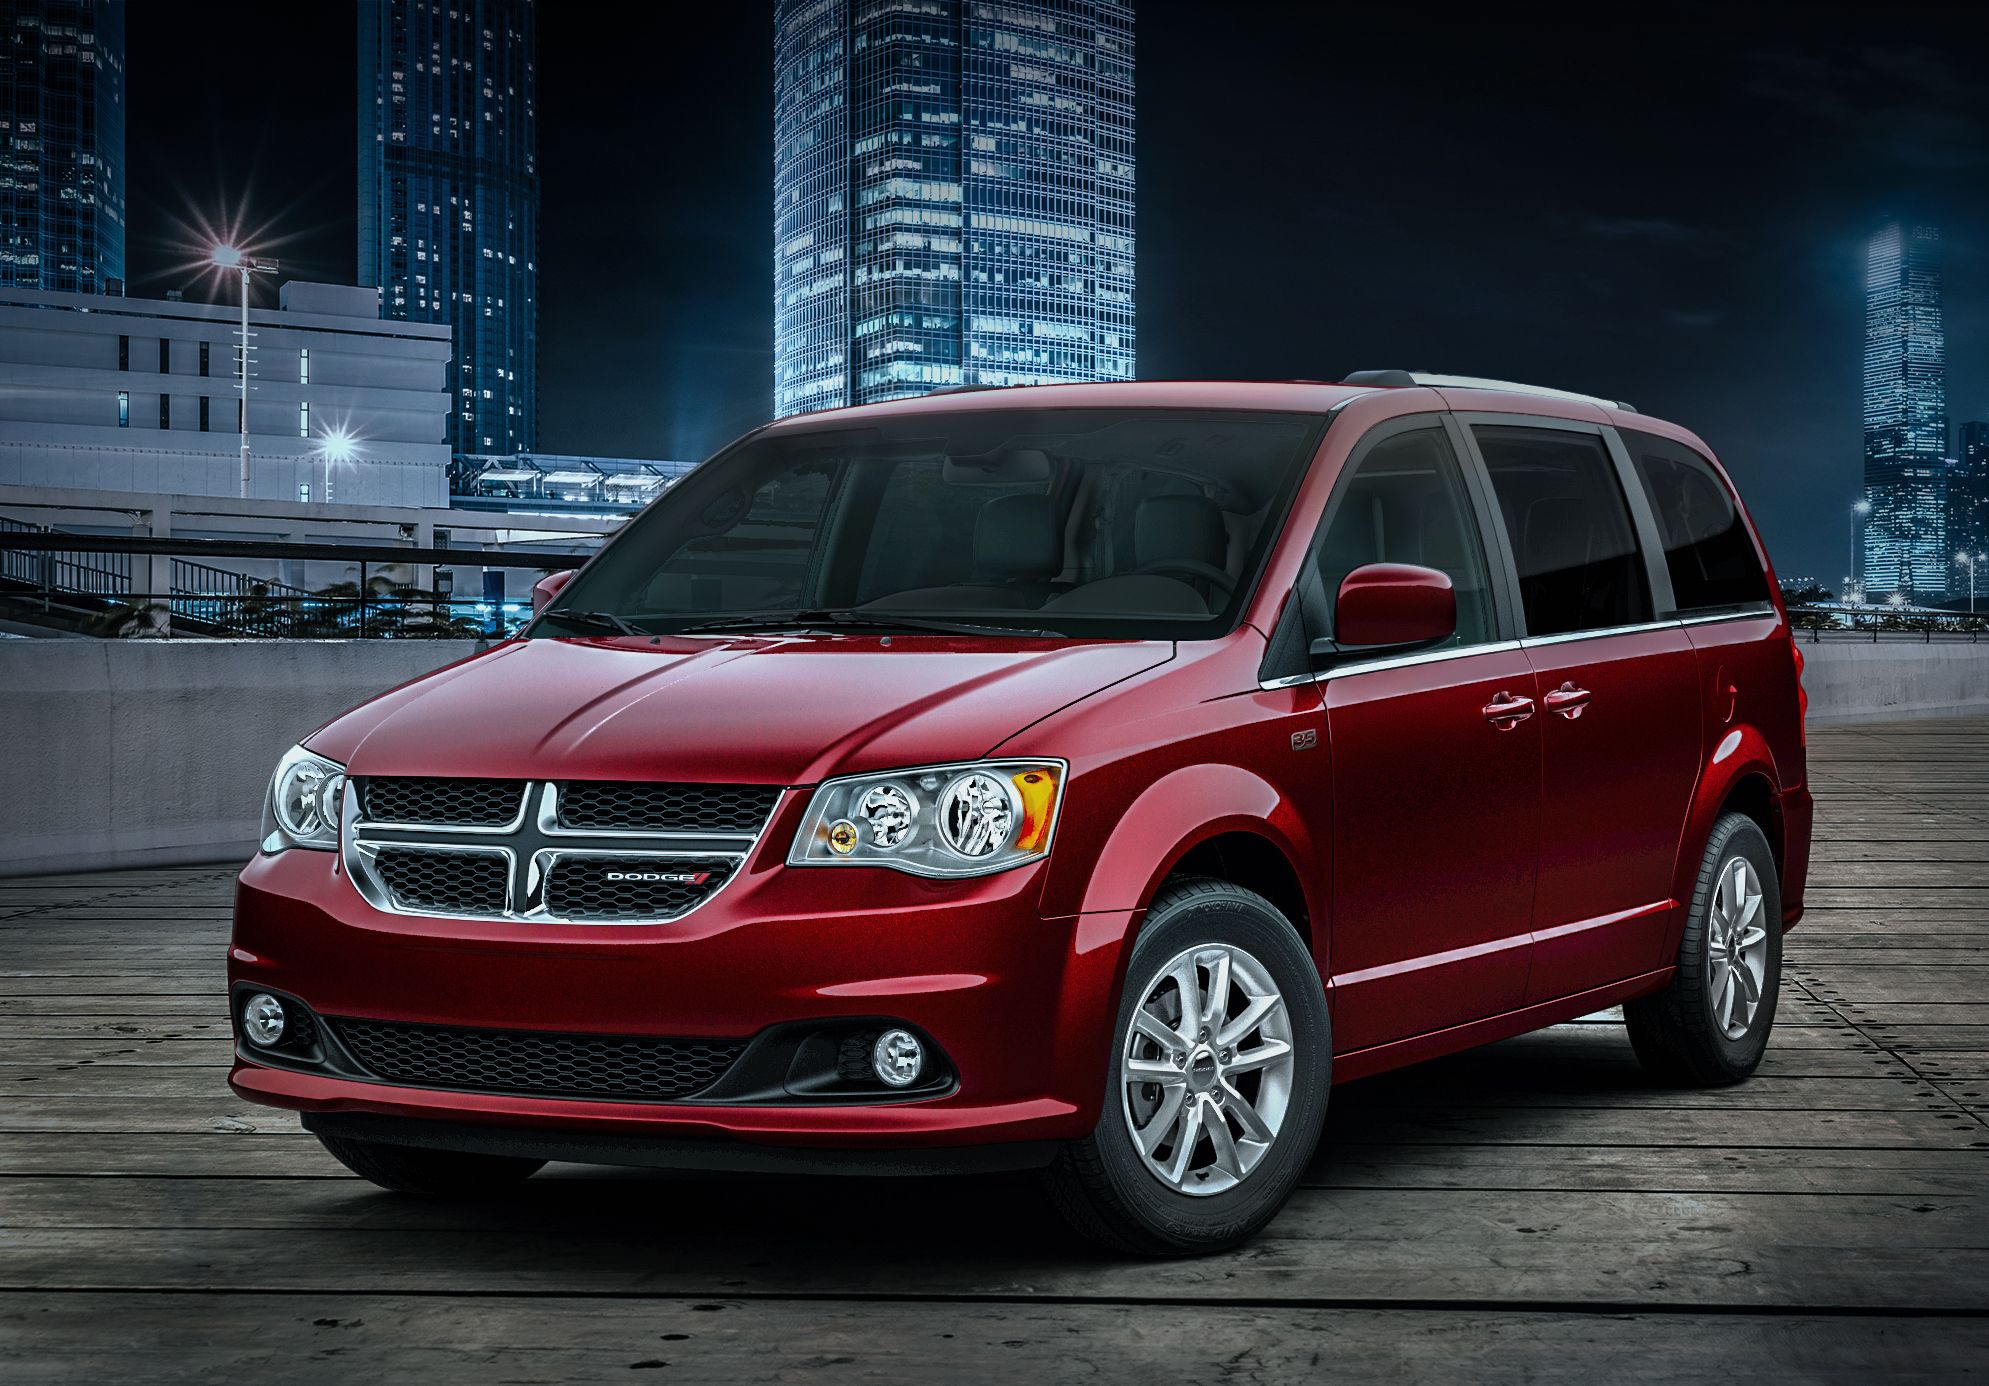 2019 Dodge Grand Caravan and Chrysler Pacifica 35th Anniversary Edition